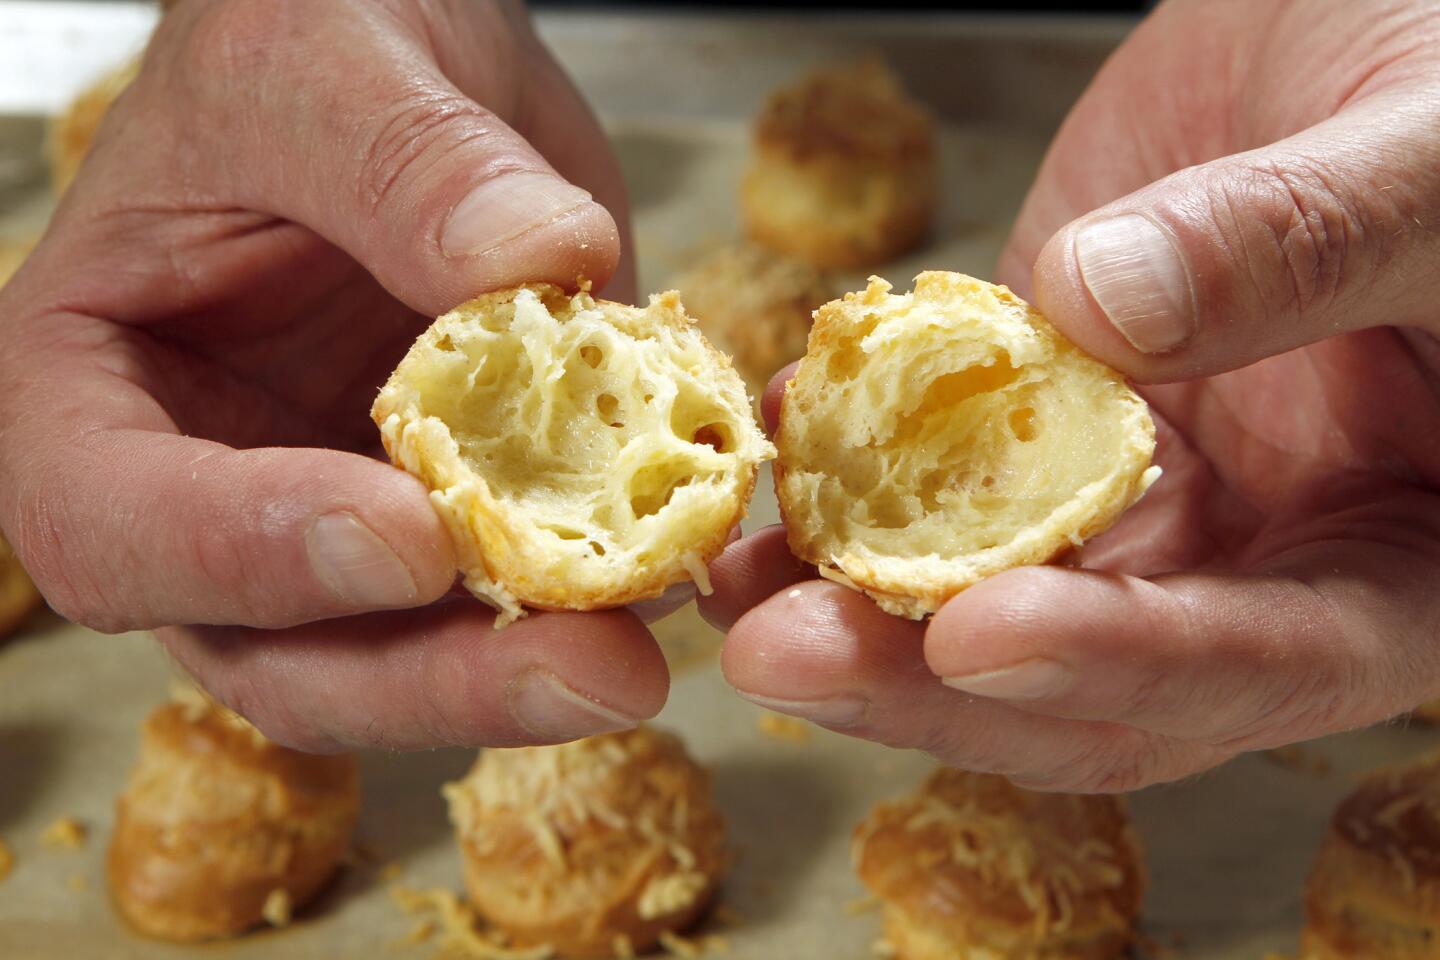 Perfectly cooked gougeres are brown, crispy and light.